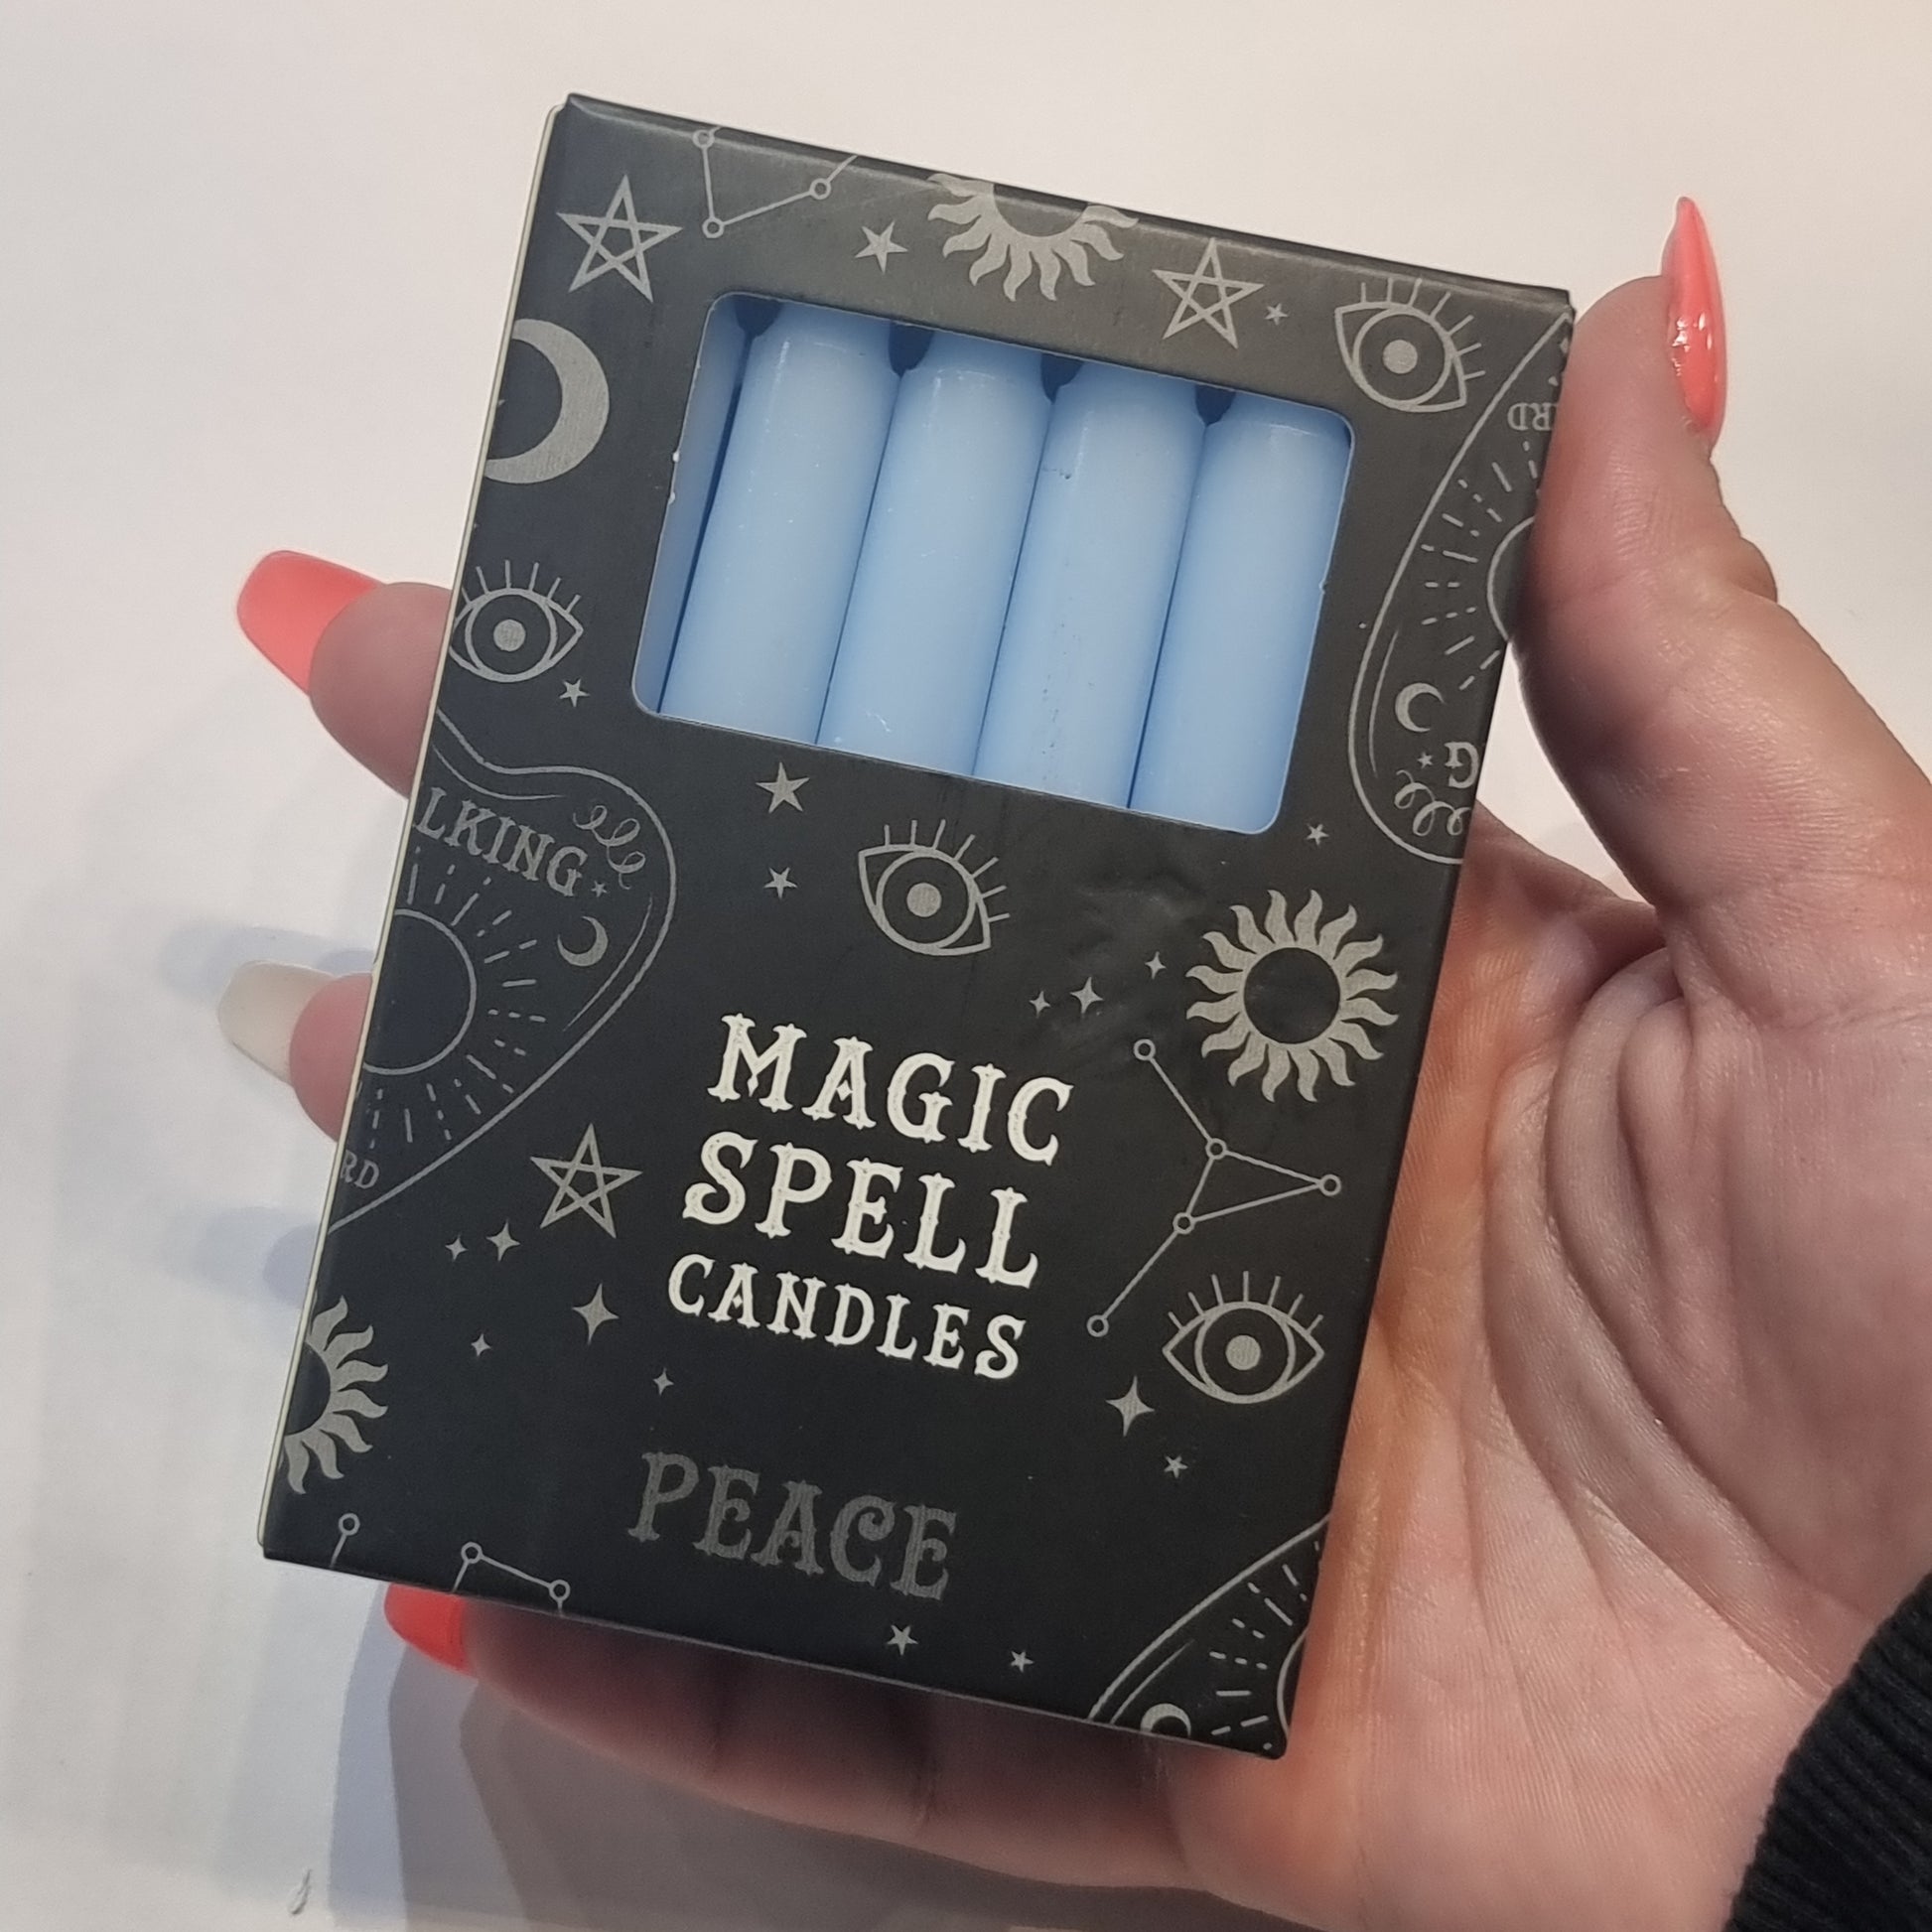 Spell candles - PEACE - Rivendell Shop